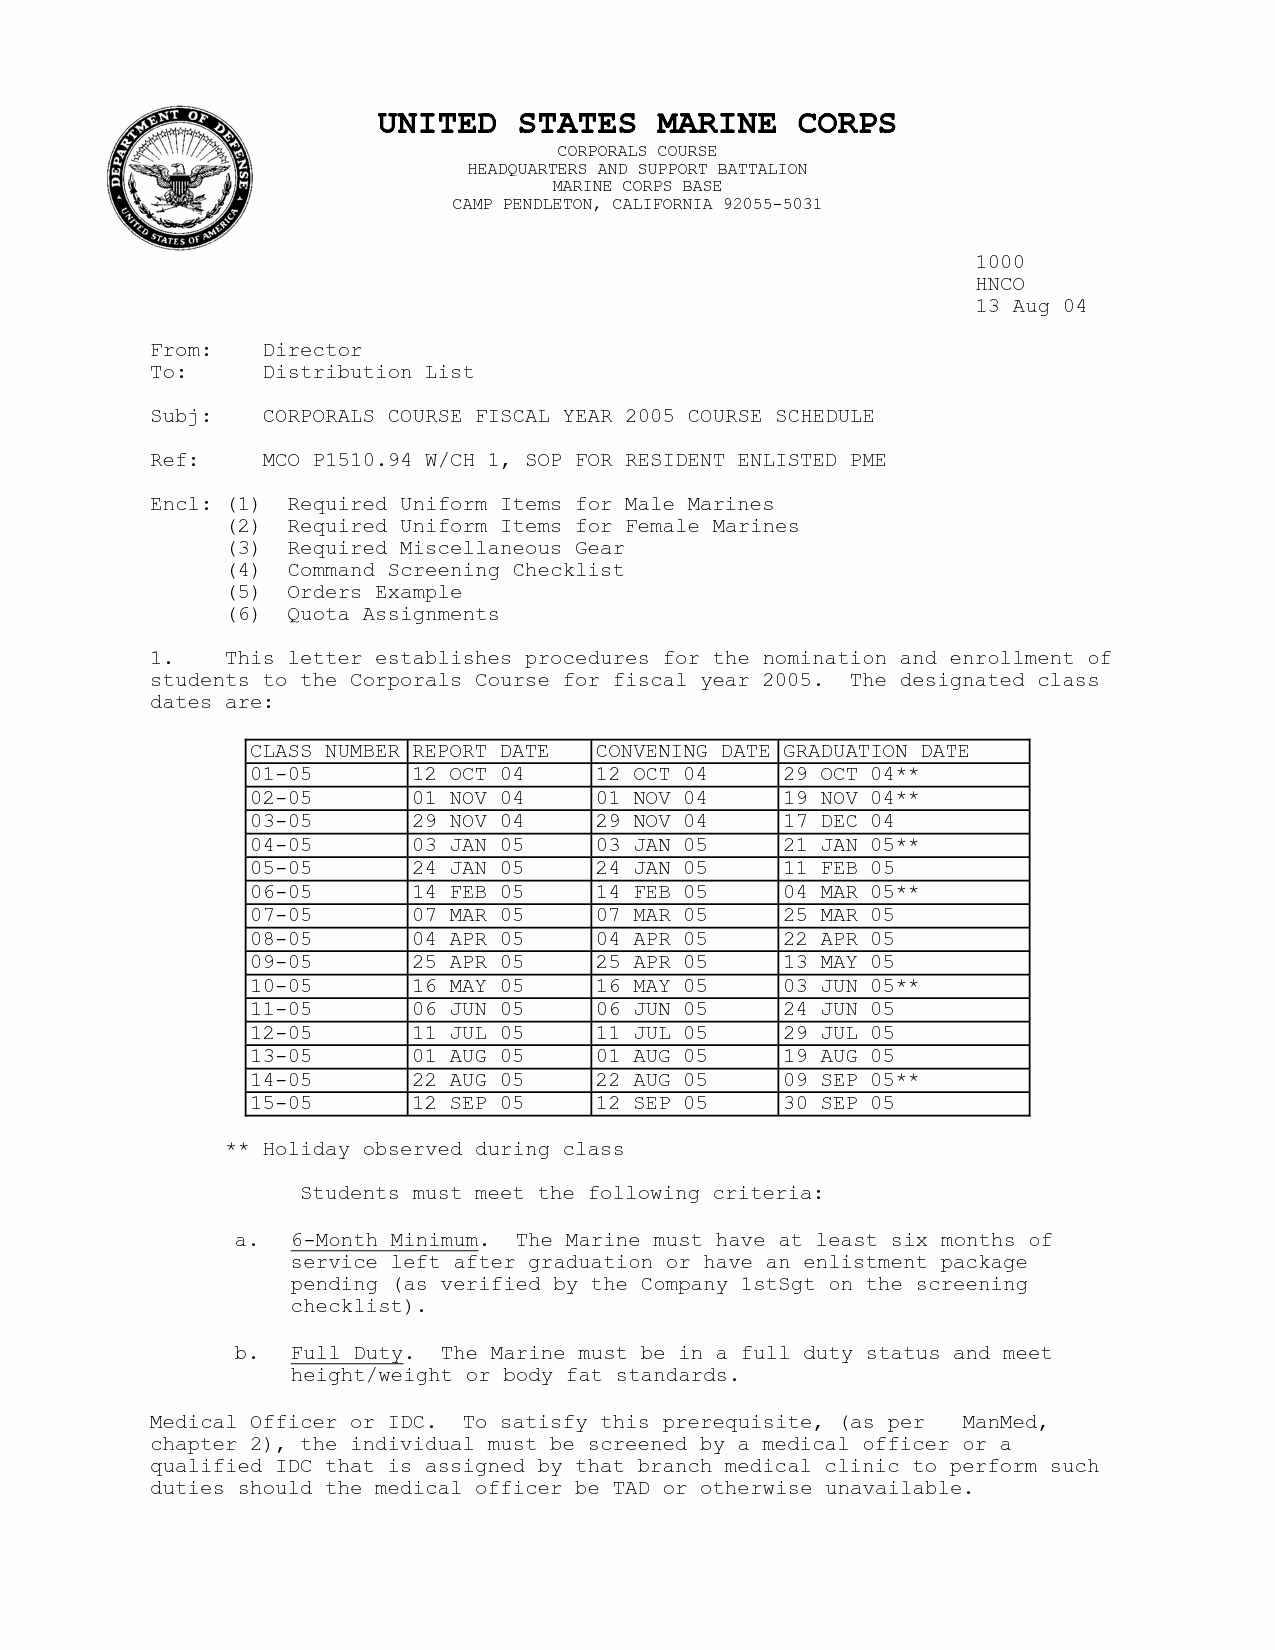 Standard Naval Letter format Template Lovely 24 Of Template A Marine Corps order